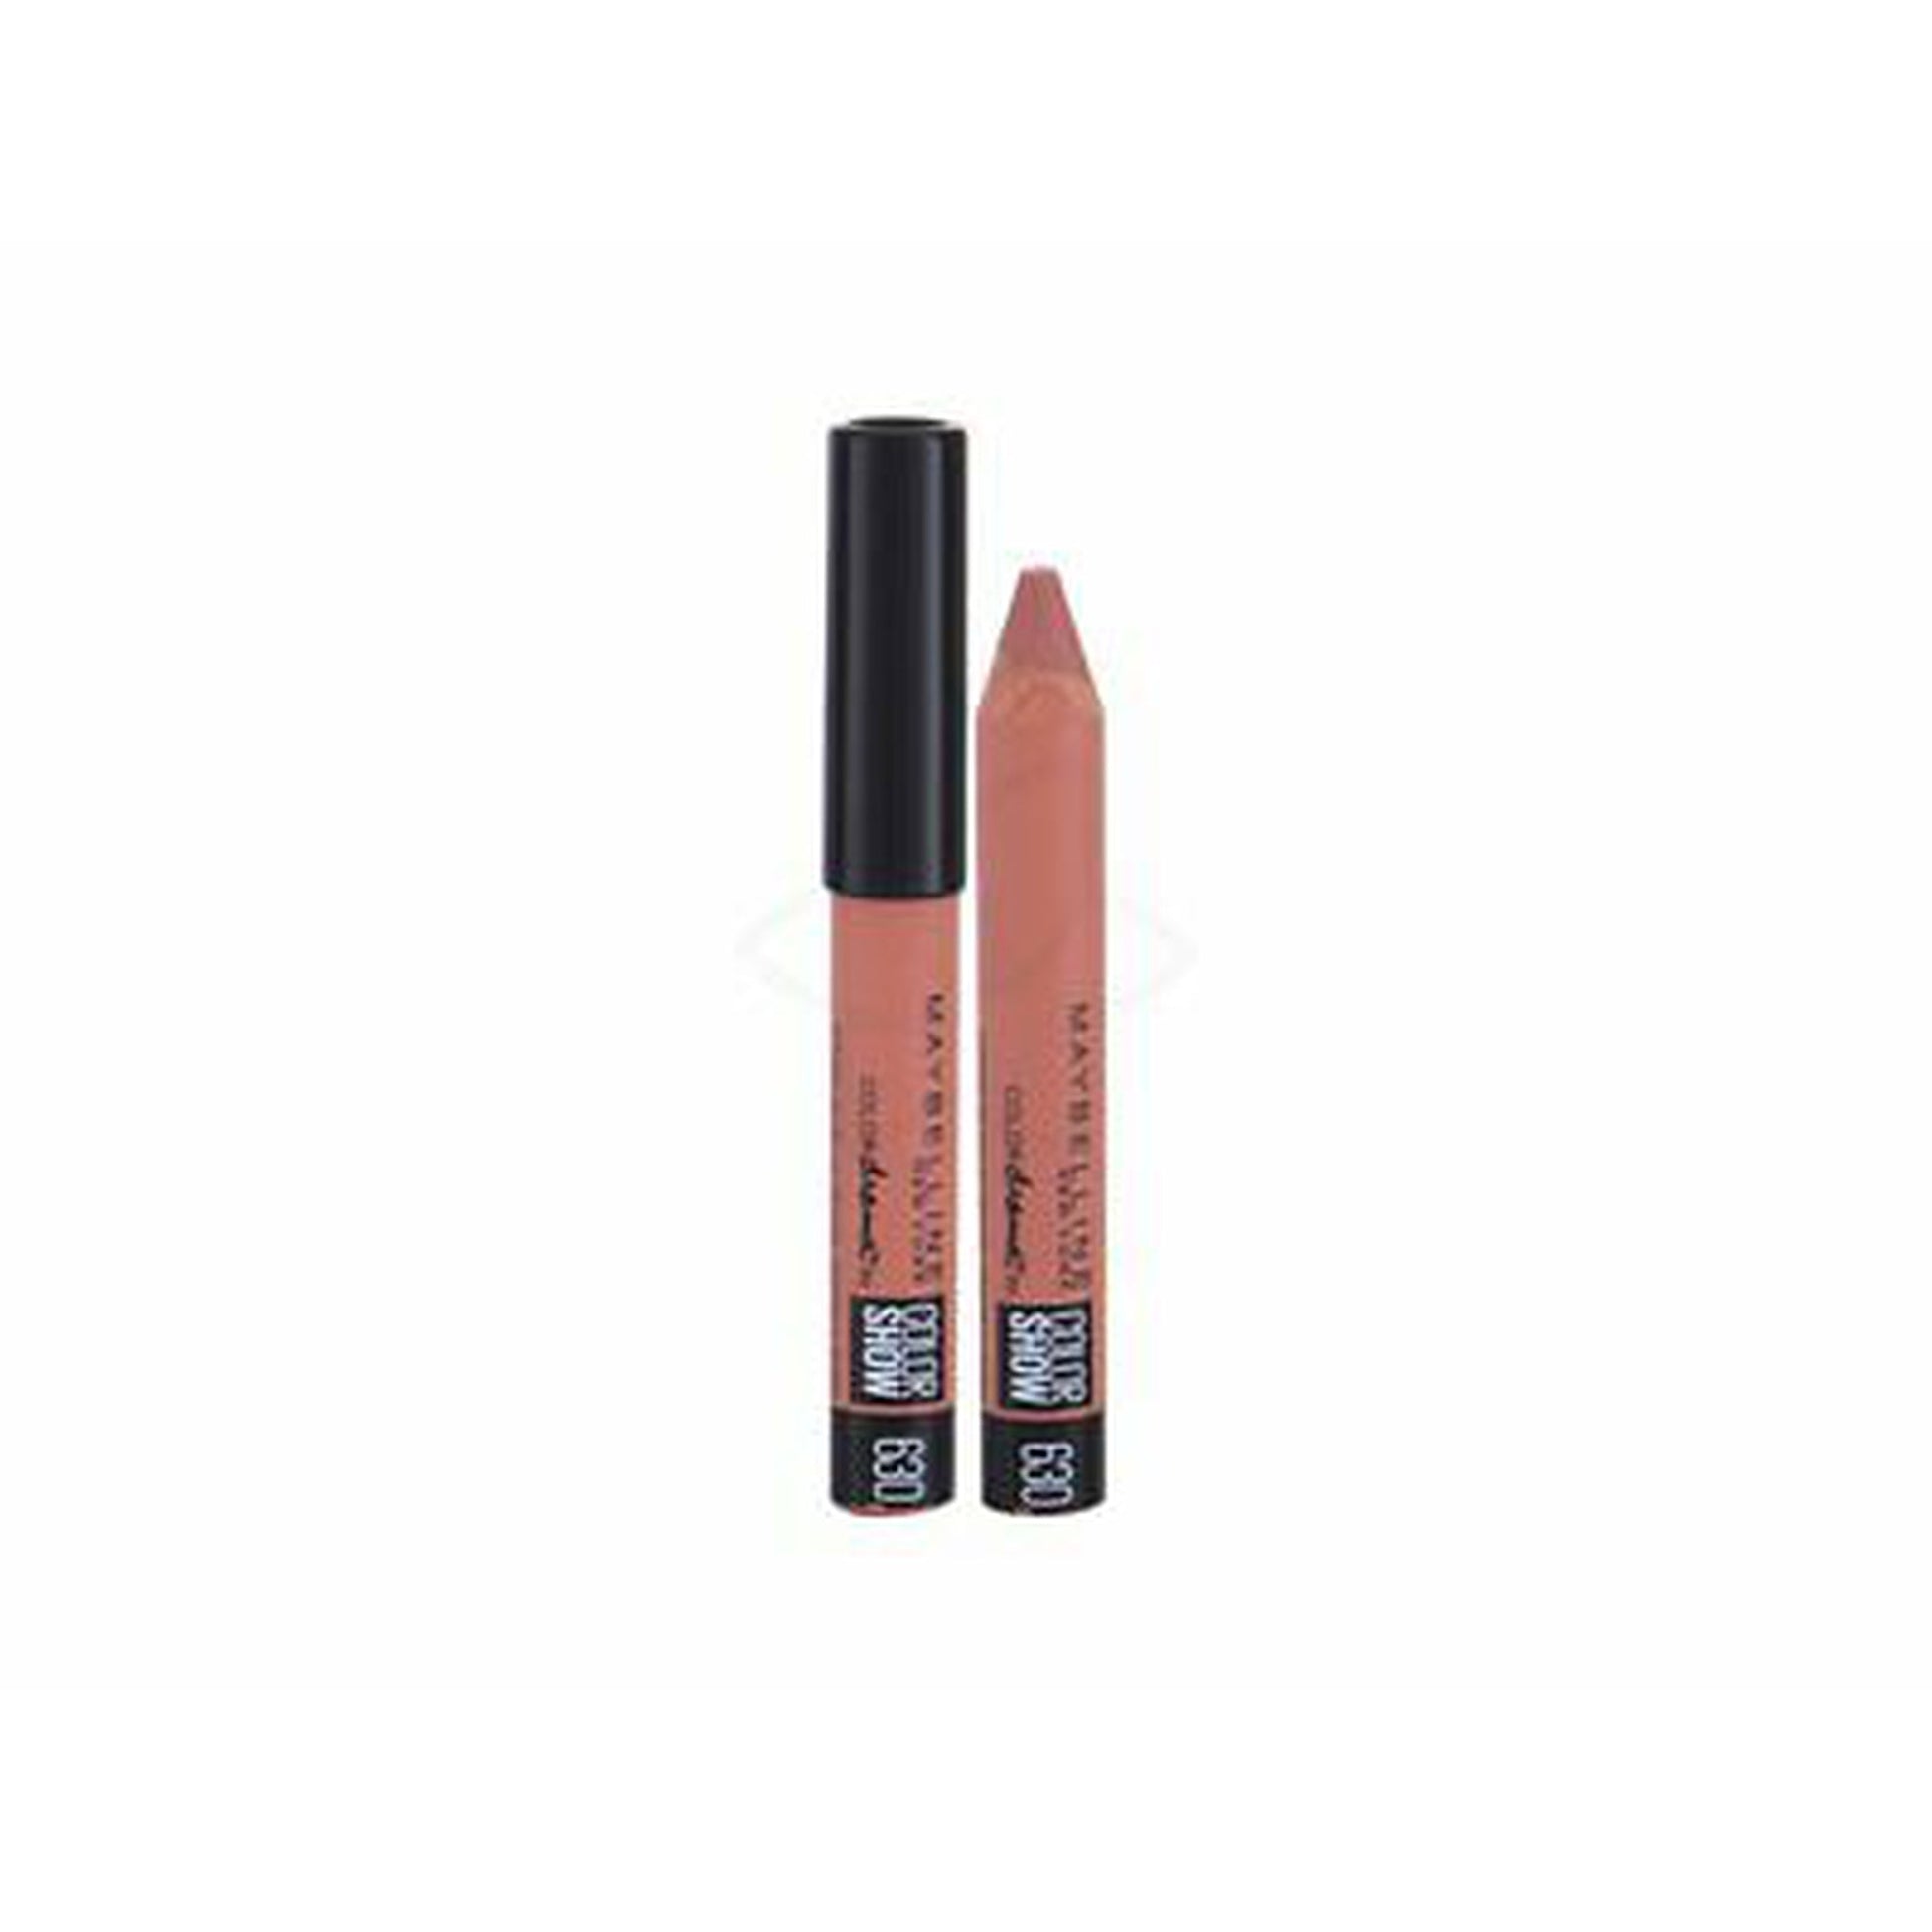 Maybelline New York Color Drama Intense Velvet Lip Pencil - 630 Nude Perfection-Maybelline-BeautyNmakeup.co.uk